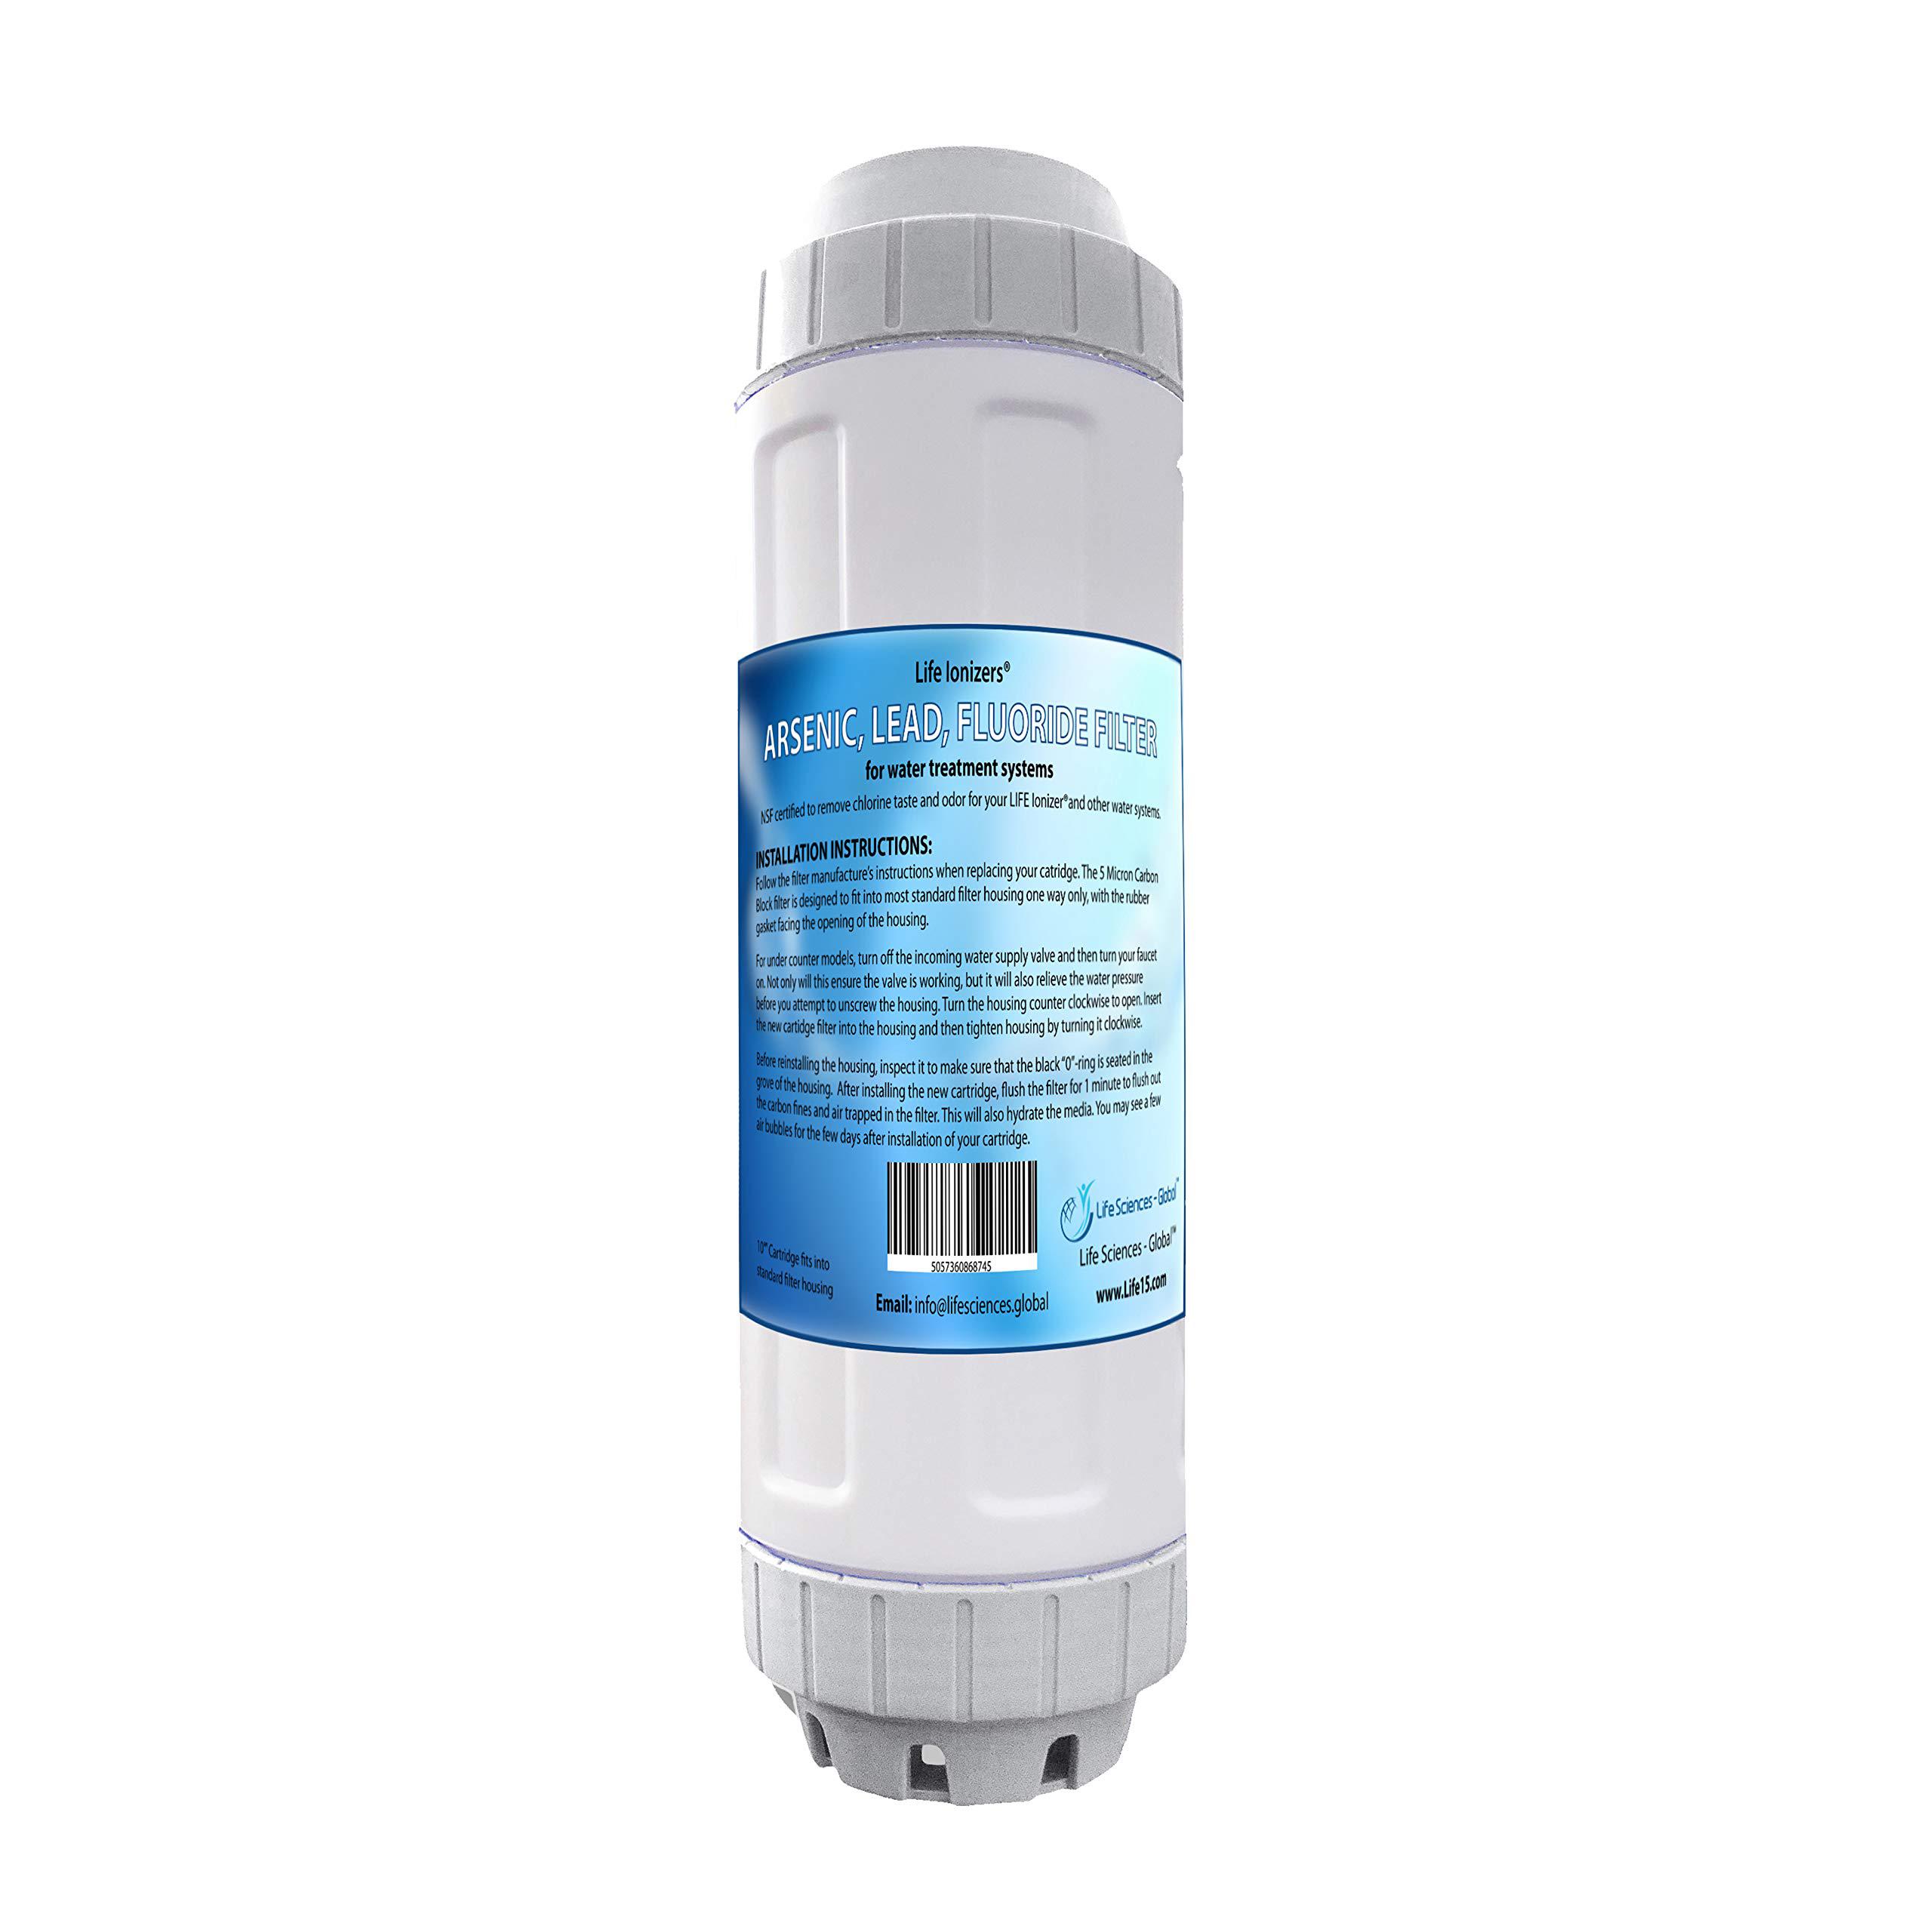 life ionizer's fluoride, arsenic, lead reduction pre-filter